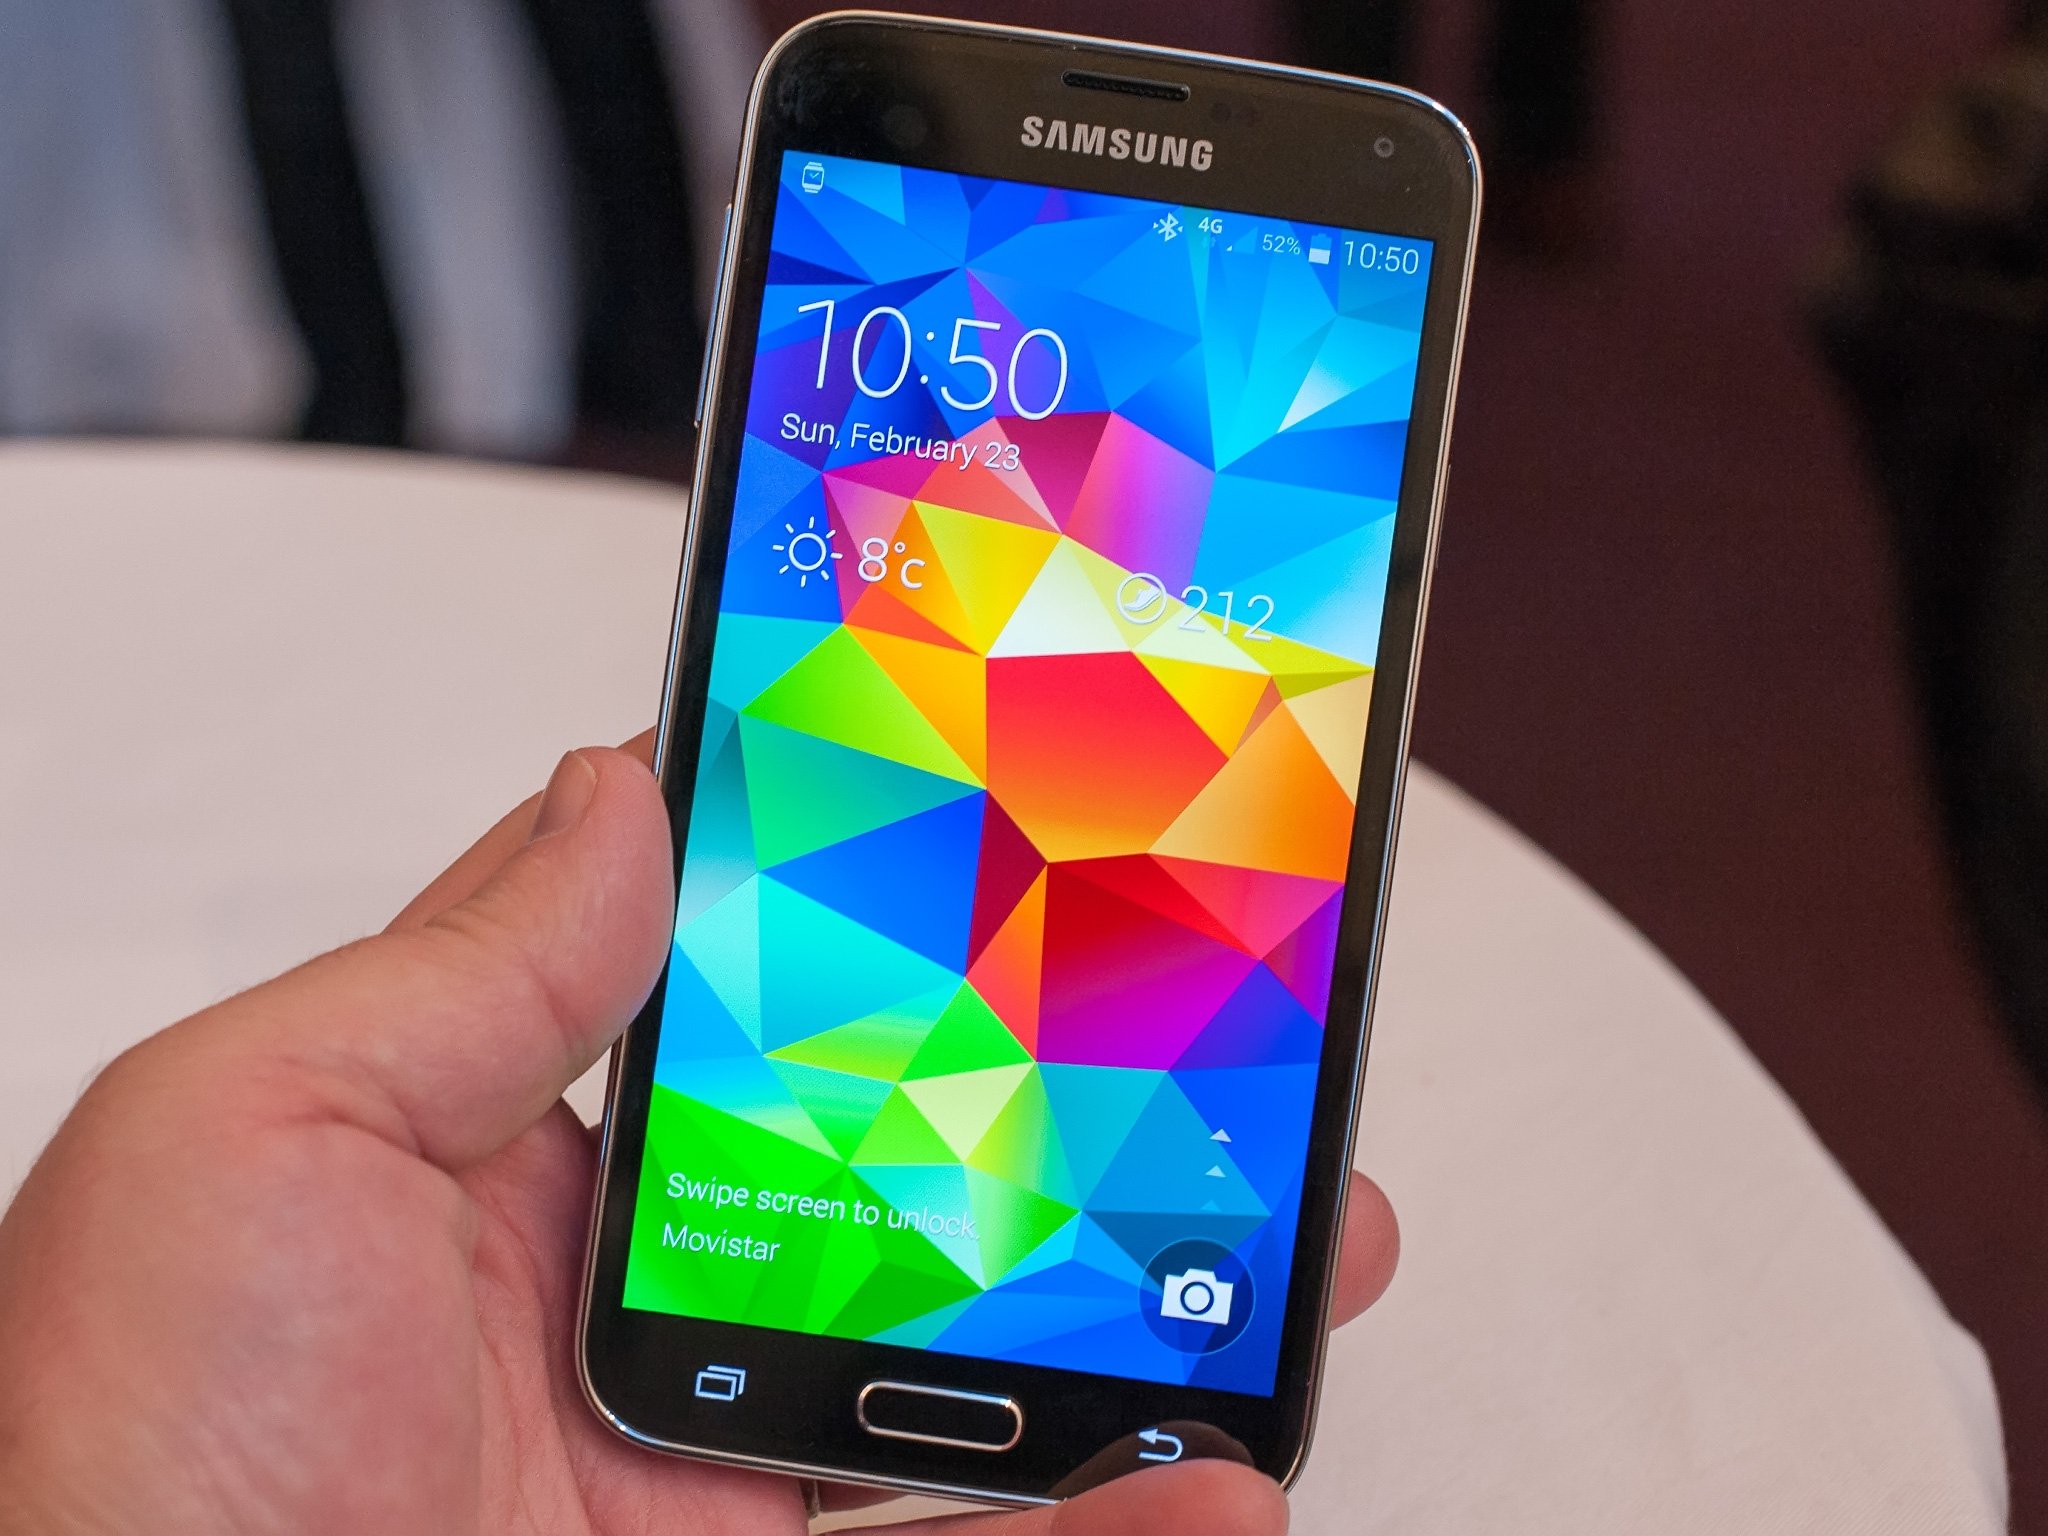 Samsung Galaxy S5 screen tech picked apart, revealing notable improvements over its predecessor